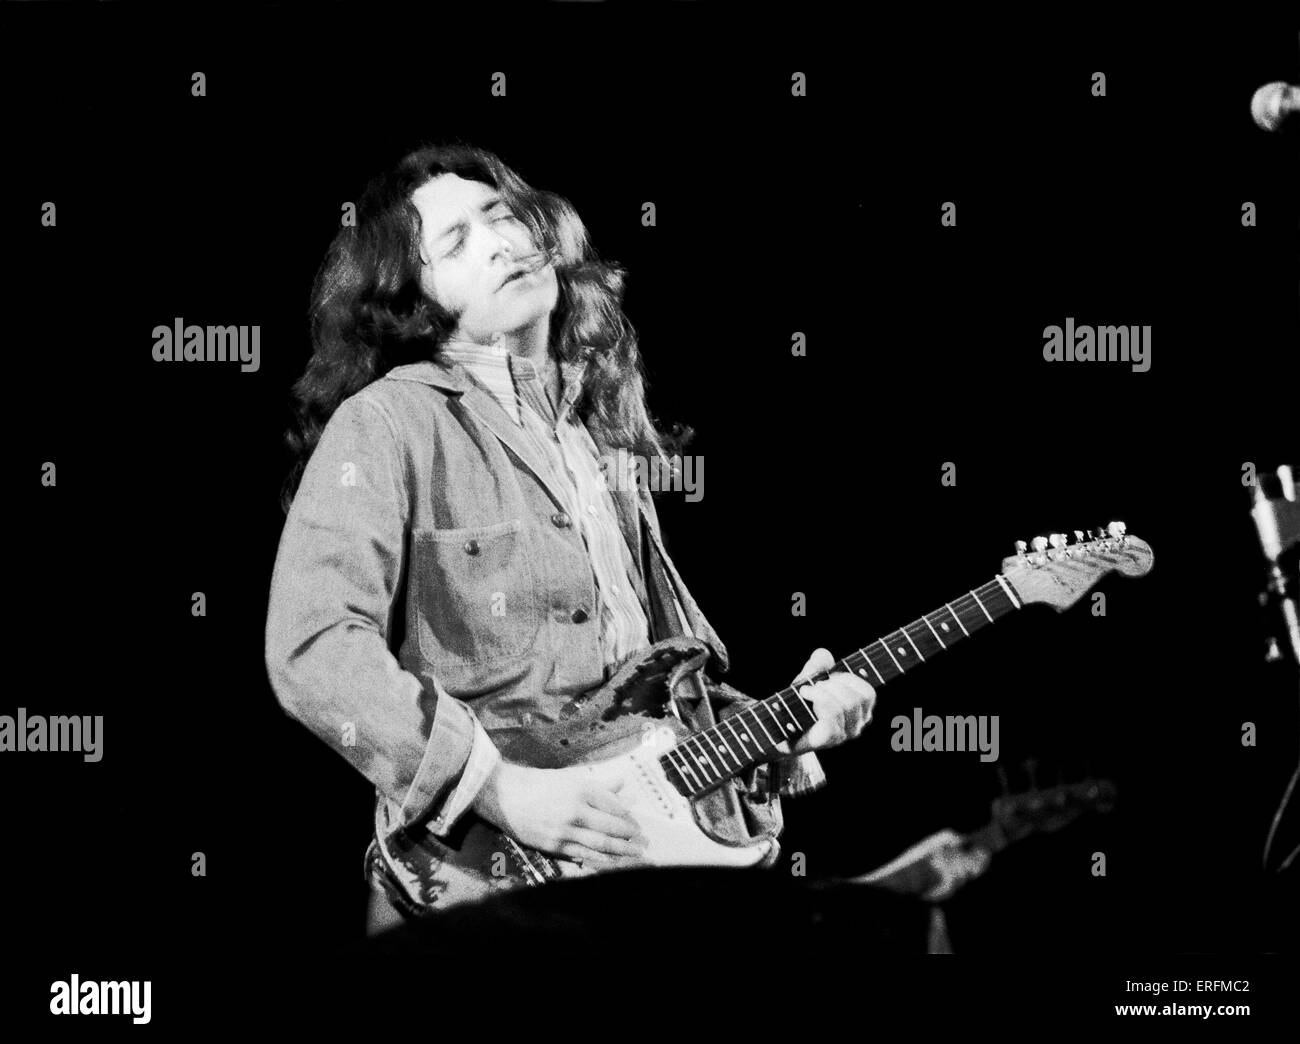 Rory Gallagher - portrait of the Irish blues / rock guitarist performing in London. RG: 2 March 1948 - 14 June 1995. Stock Photo